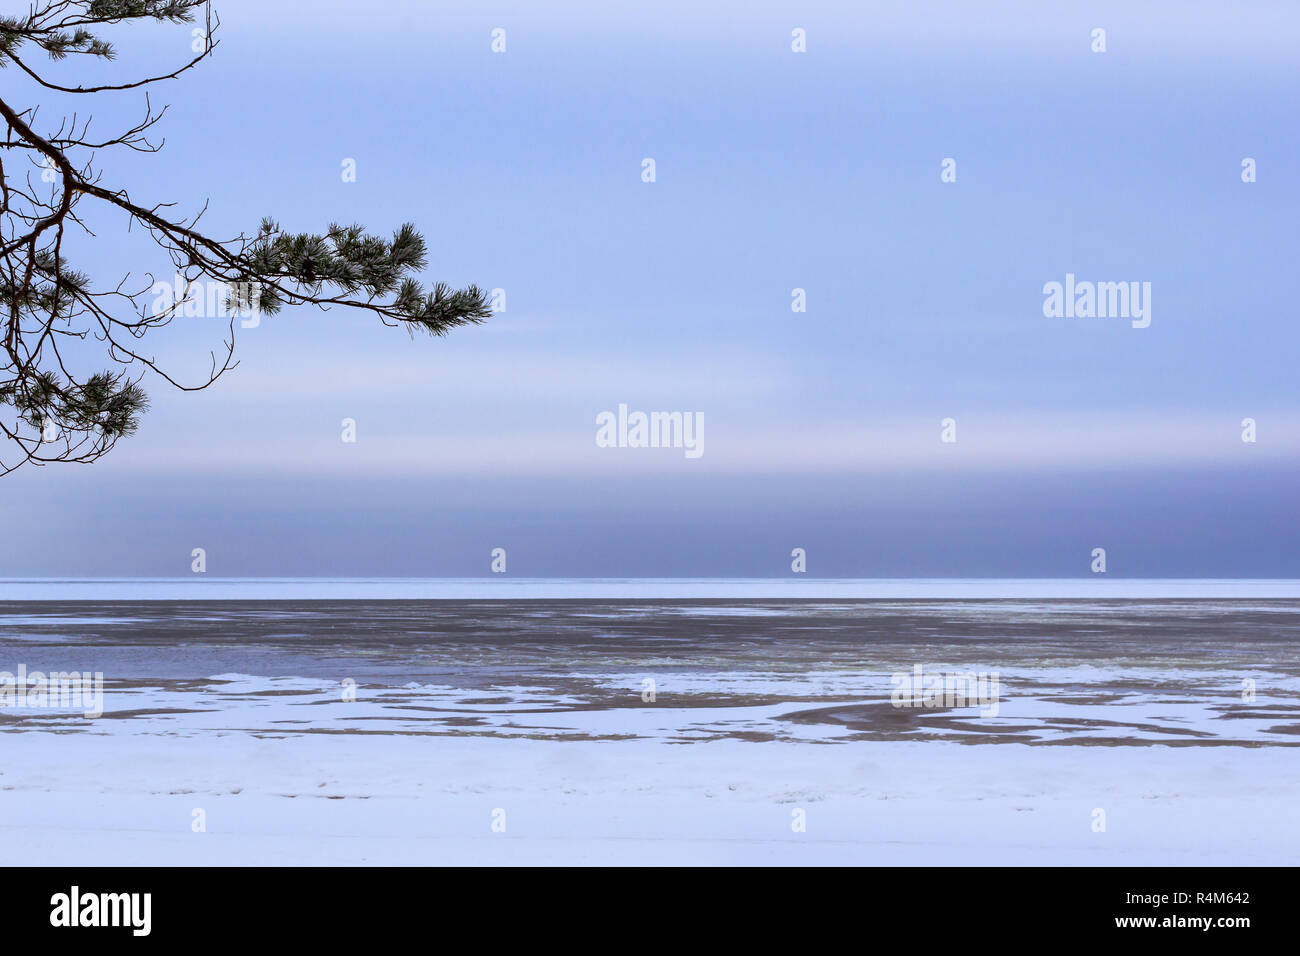 Winter day on snowy shore of Narva Bay. Snow on the ice of the frozen Gulf of Finland. Narva-Joesuu resort town in North-East of Estonia Ida-Virumaa County. Severe Northern winter and snowy weather Stock Photo